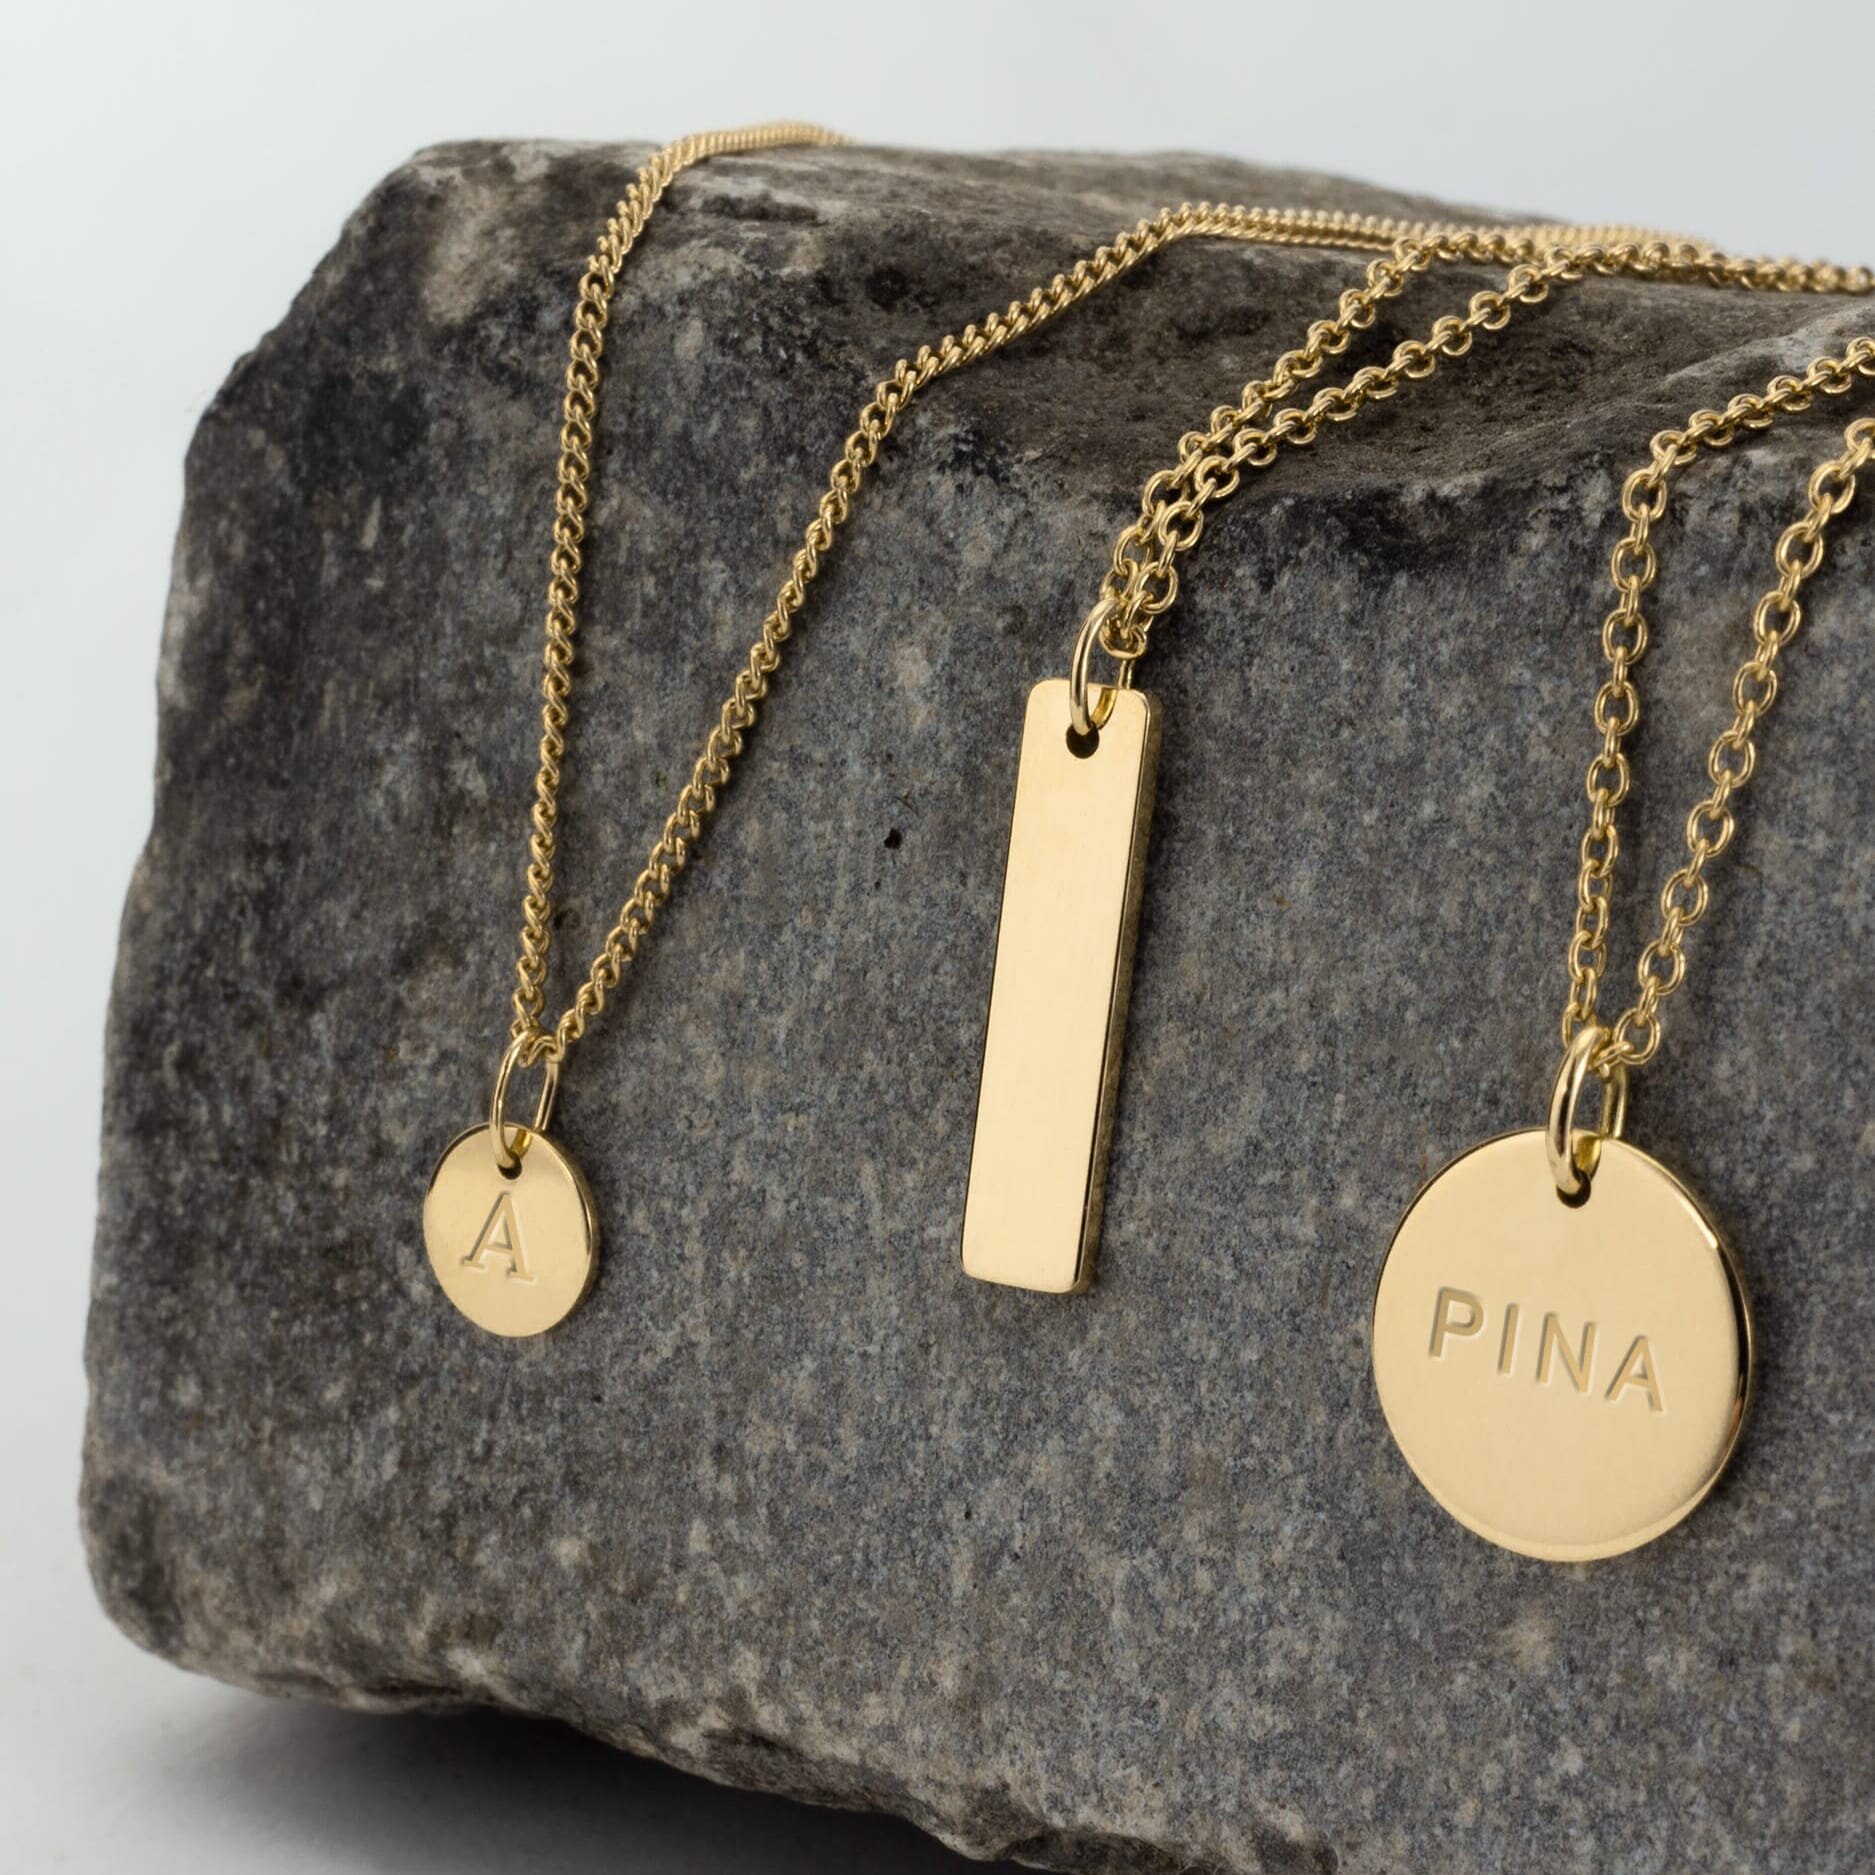 Individuell f&uuml;r Dich! Unsere Little Things Anh&auml;nger aus 750er Fairtrade Gold mit pers&ouml;nlicher Gravur.
...
Just for you! Our Little Things Pendants made out of 18K Fairtrade Gold with custom engraving.

 #zeitlos #langlebig #fairtradego